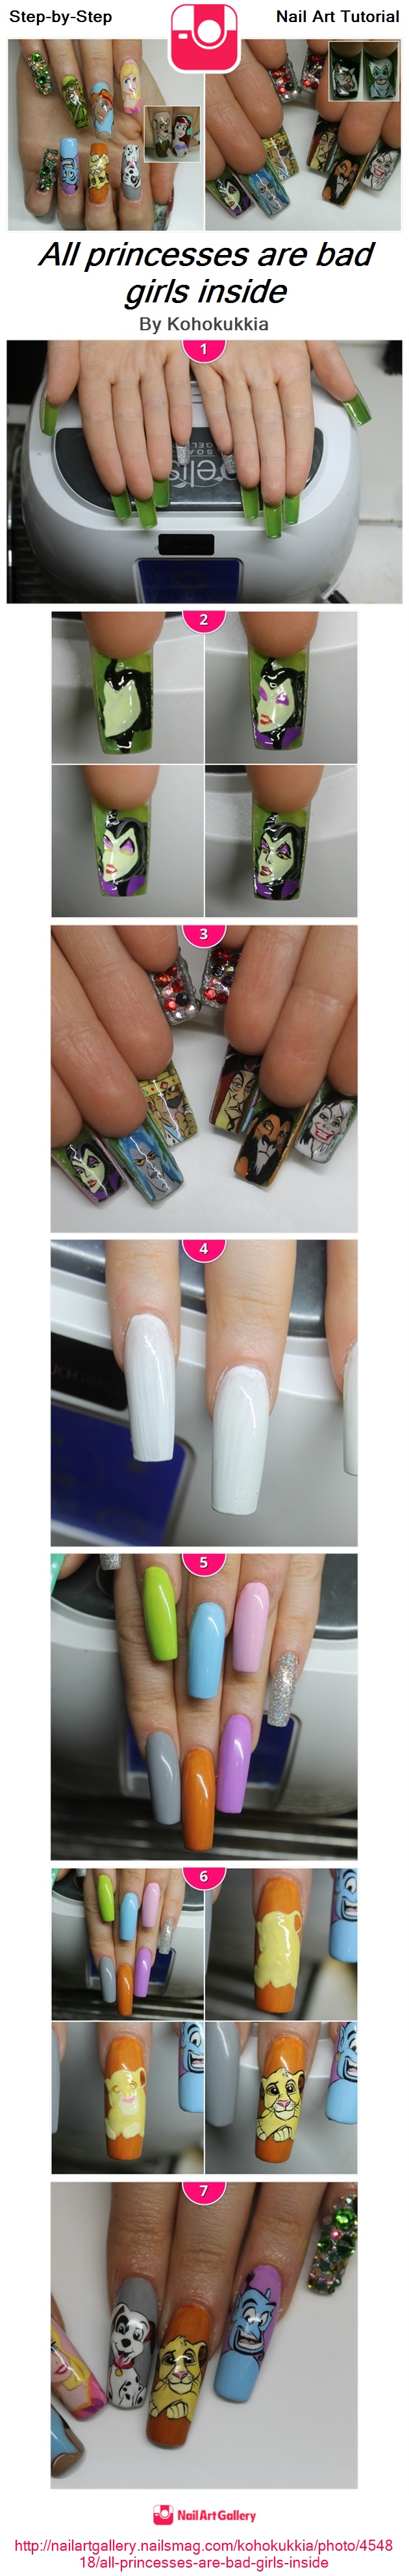 All princesses are bad girls inside - Nail Art Gallery